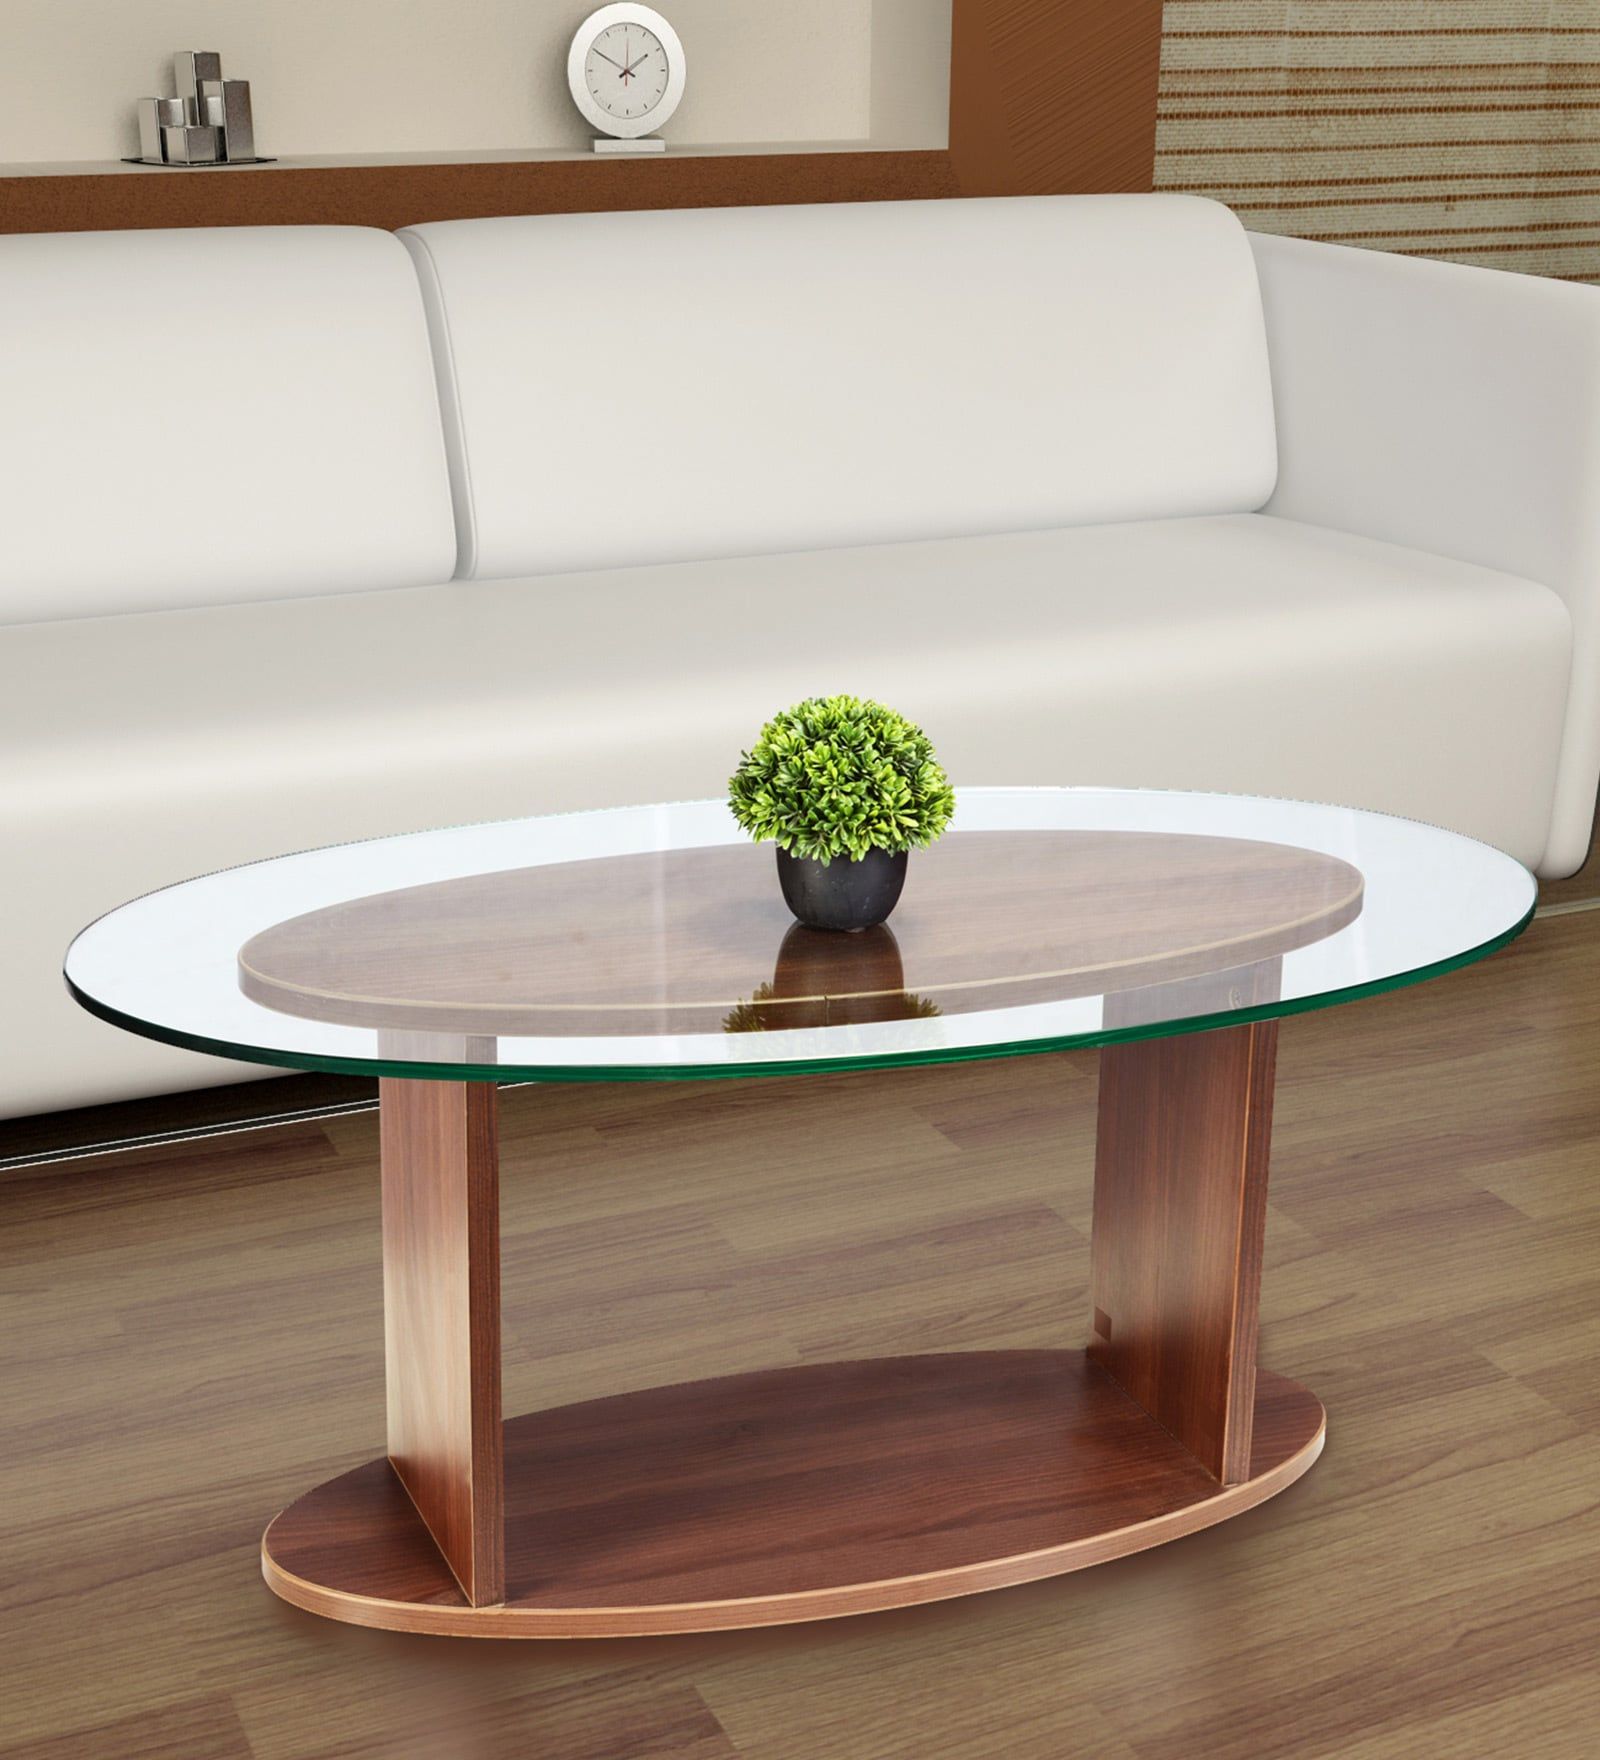 Buy Oval Shaped Glass Top Coffee Table In Walnut Finishaddy Design With Regard To Tempered Glass Oval Side Tables (Gallery 9 of 20)